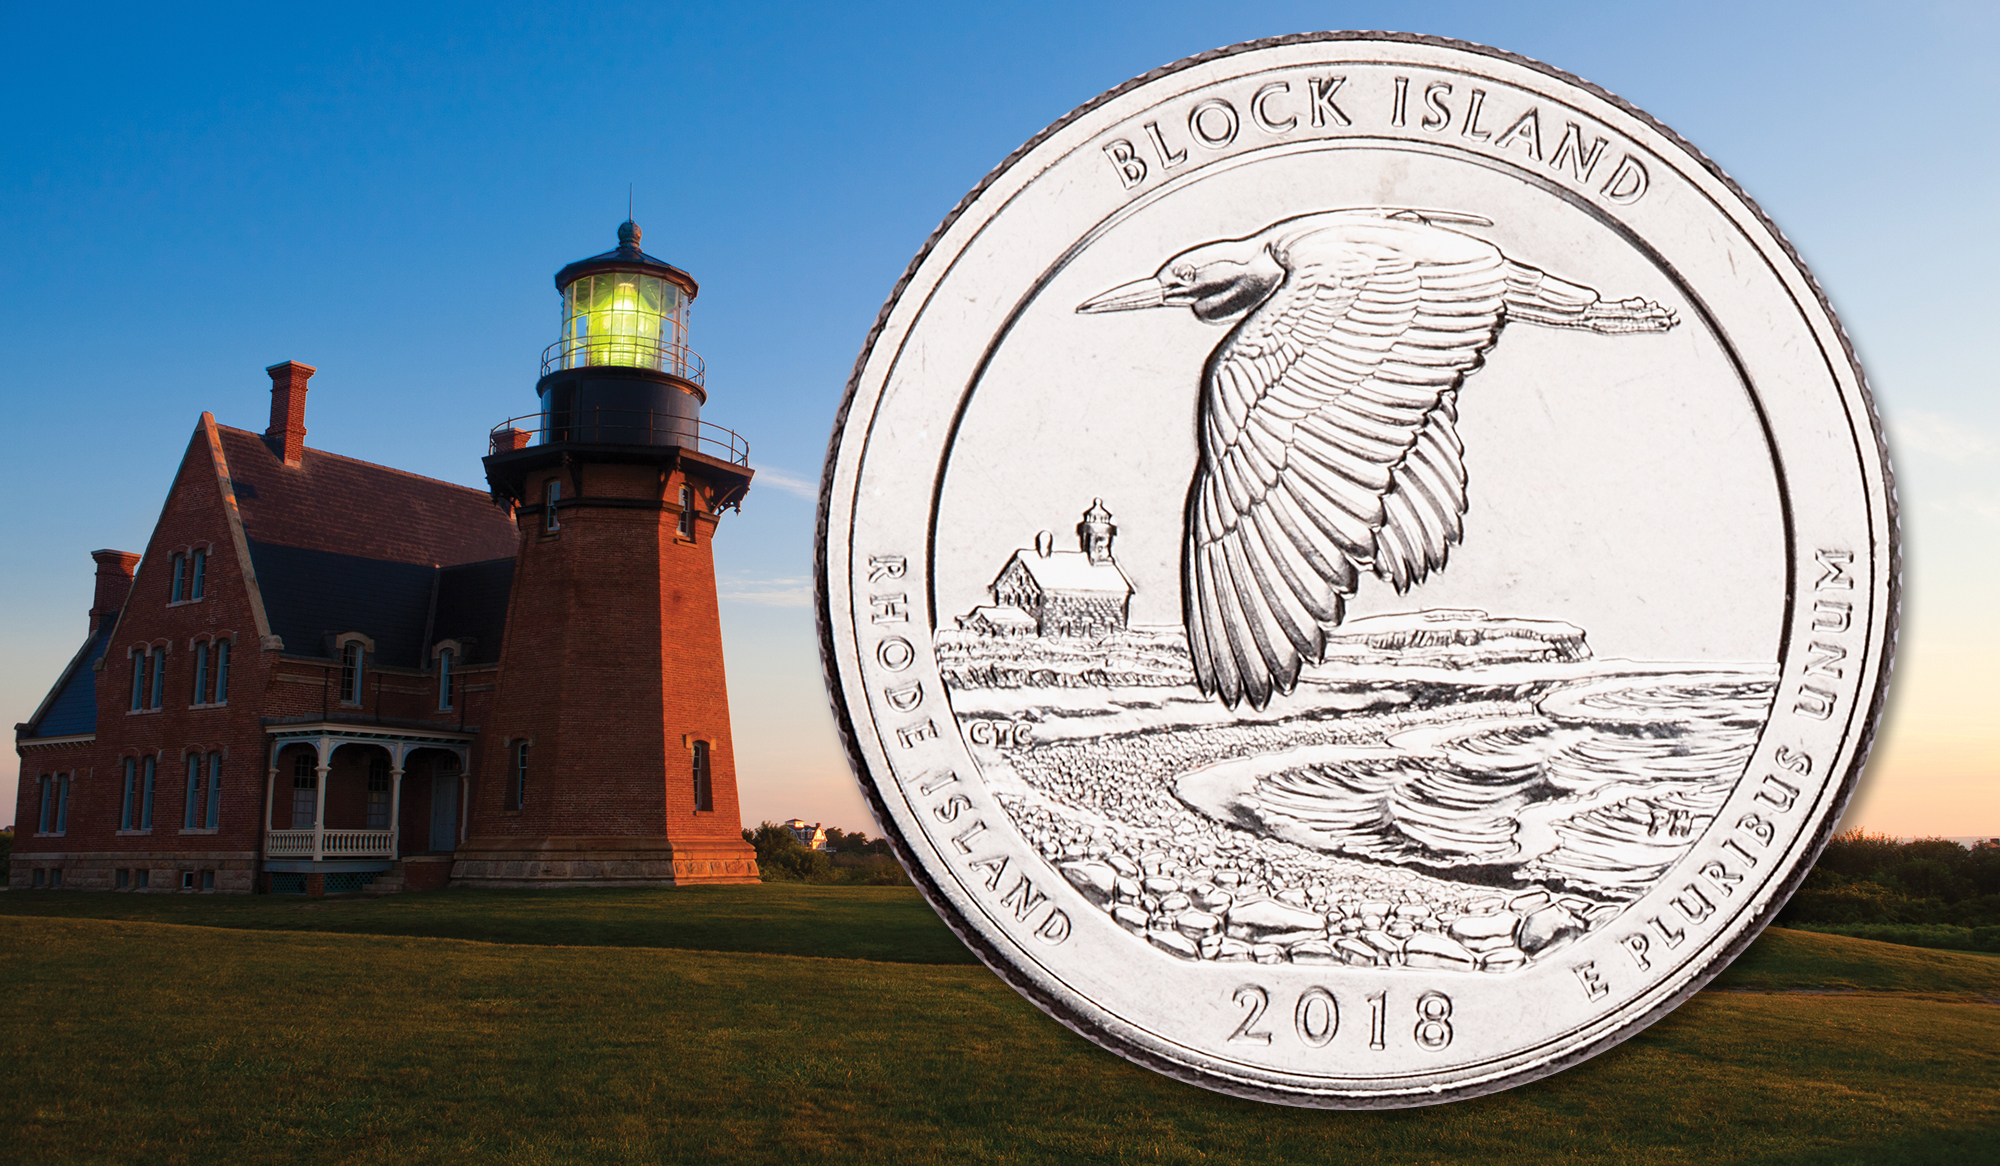 Block Island - 'One of the 12 last great places in the Western Hemisphere.'